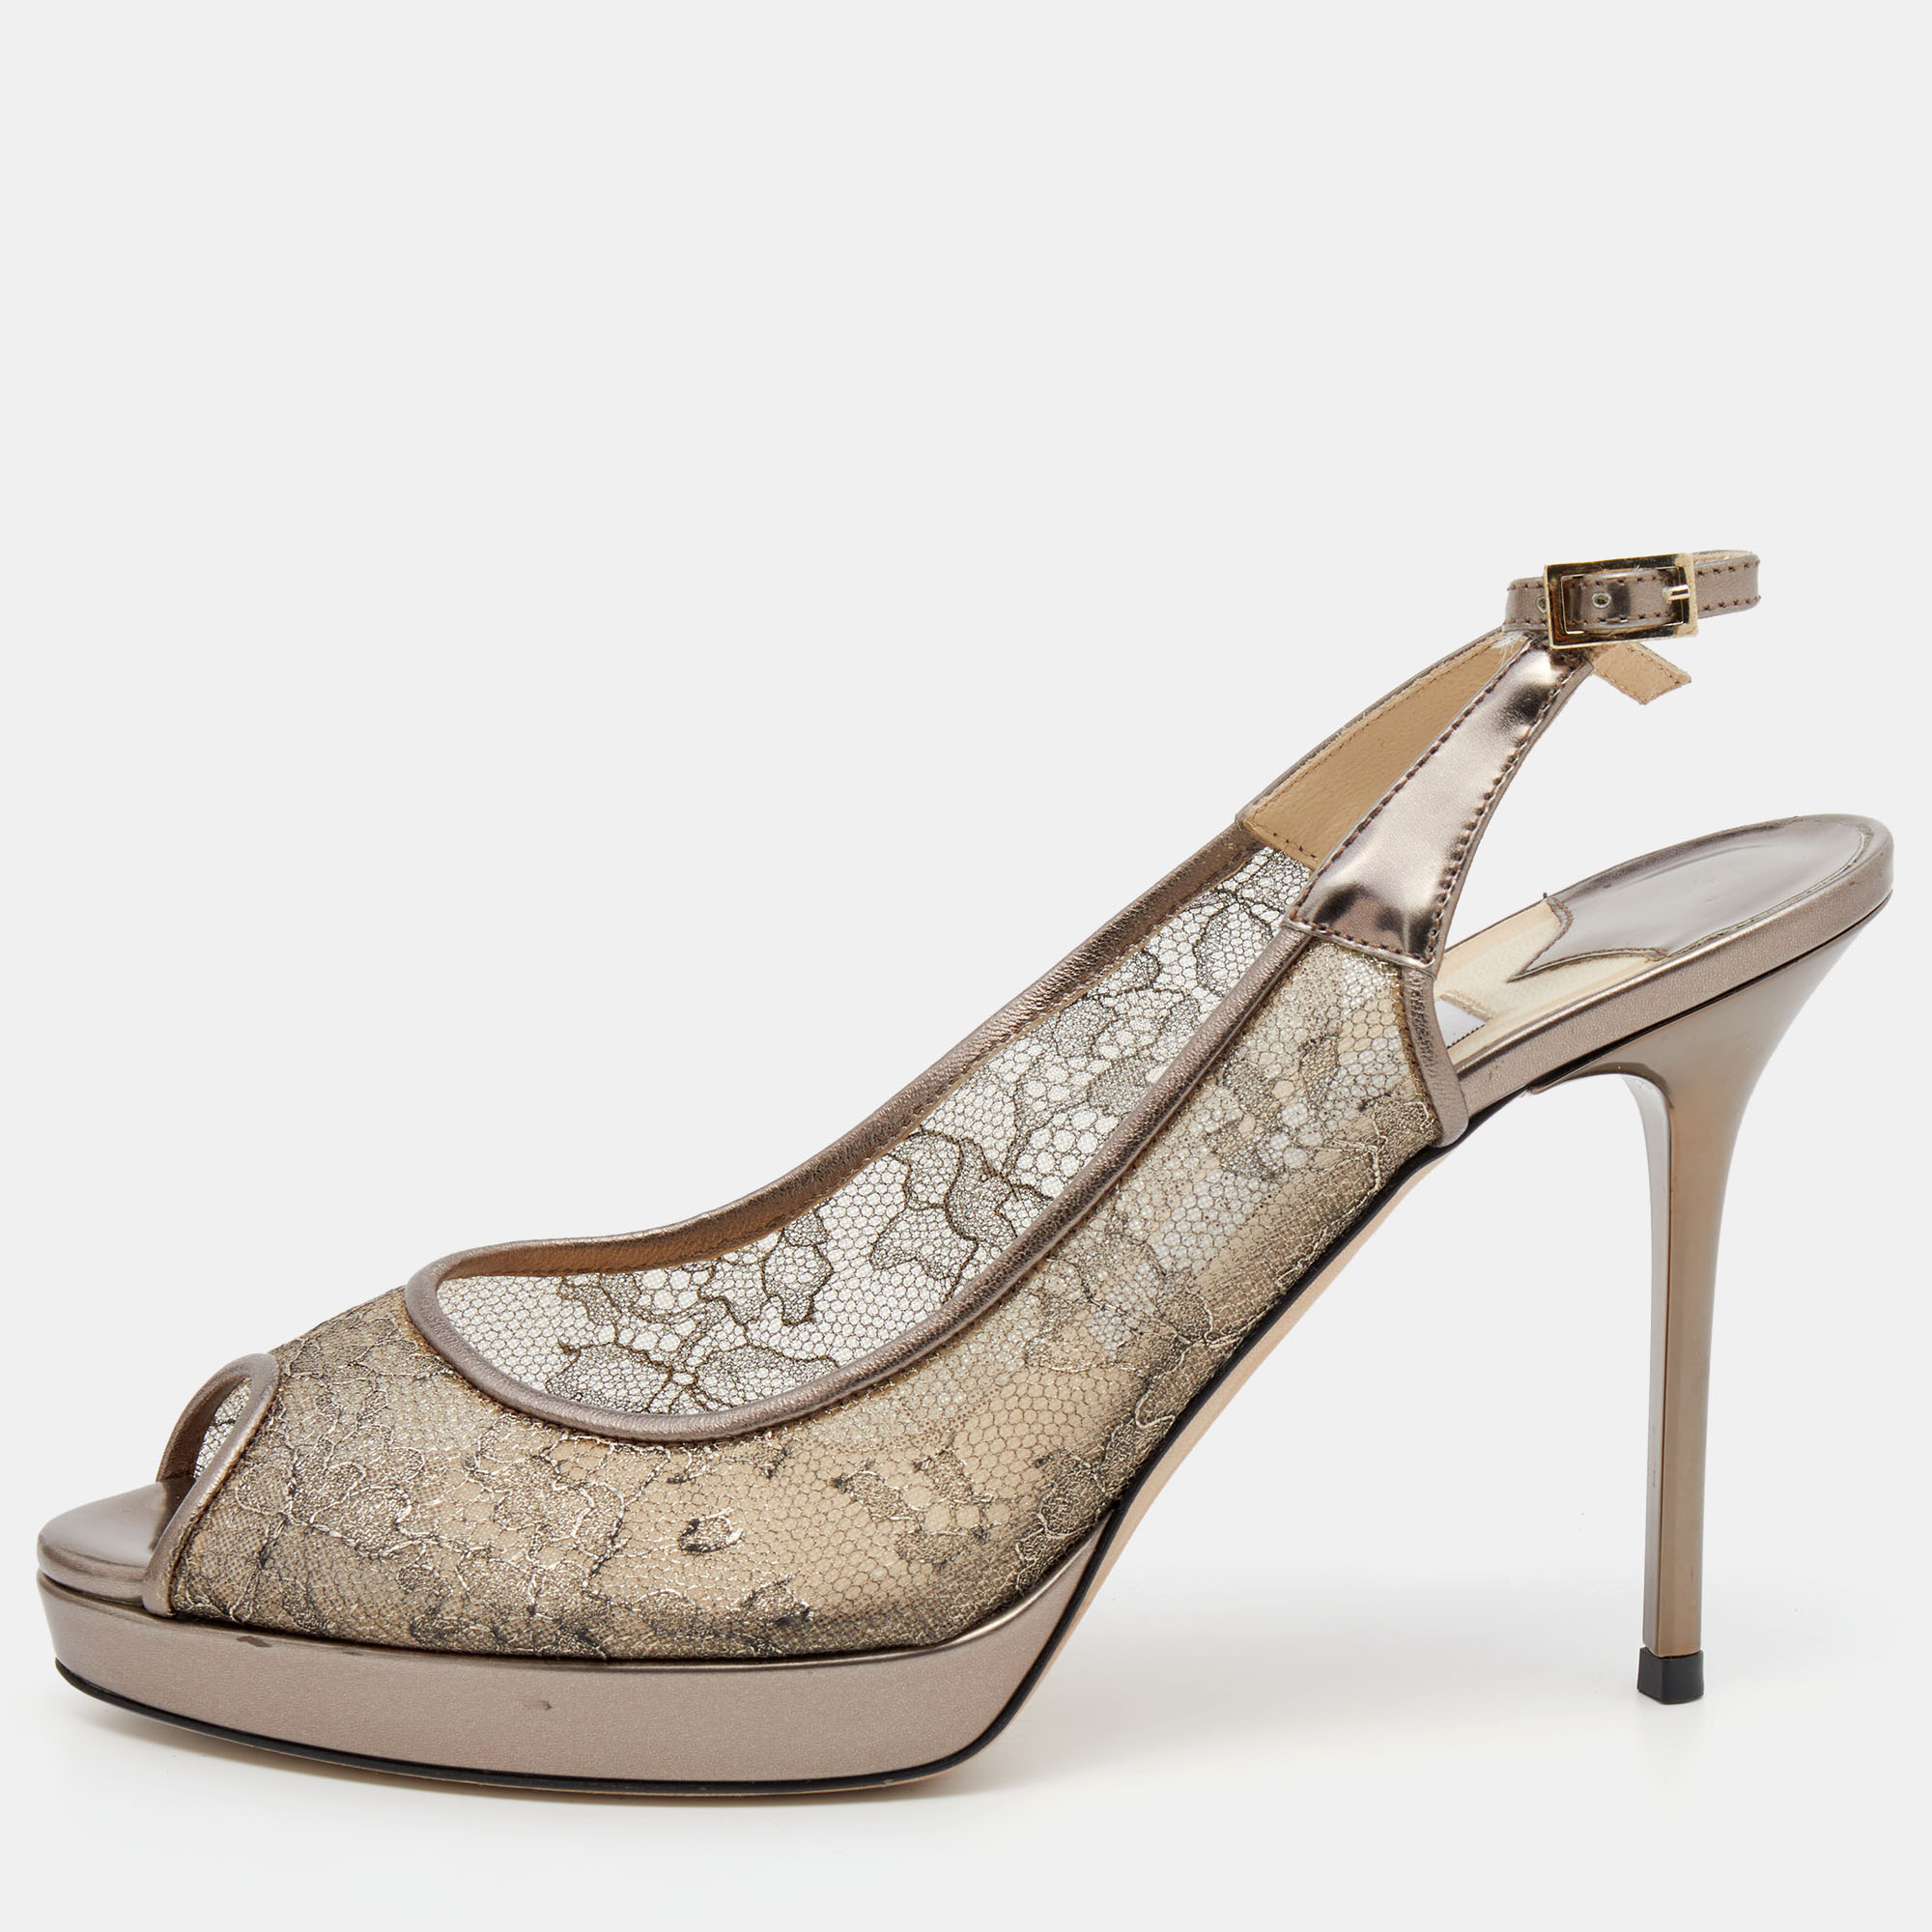 It is easy to fall in love with these pumps by Jimmy Choo Theyve been beautifully covered in lace and designed with peep toes platforms and slim 10.5 cm heels. The feminine dainty pumps are sure to complement all your dresses and evening gowns.